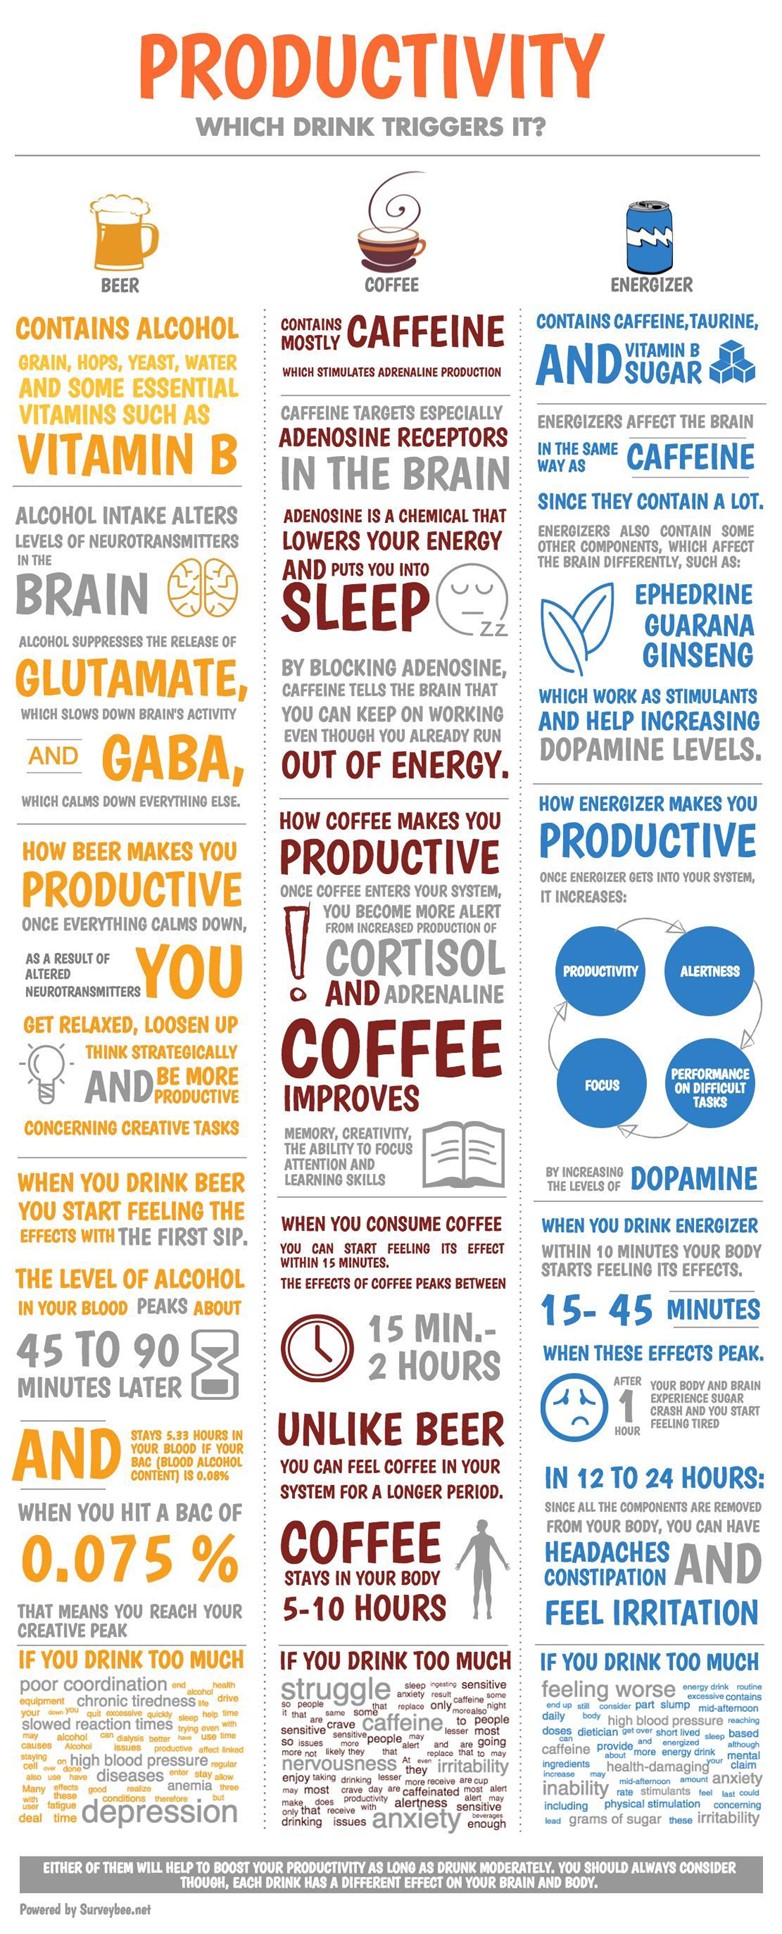 Productivity- Which Drink Triggers it?